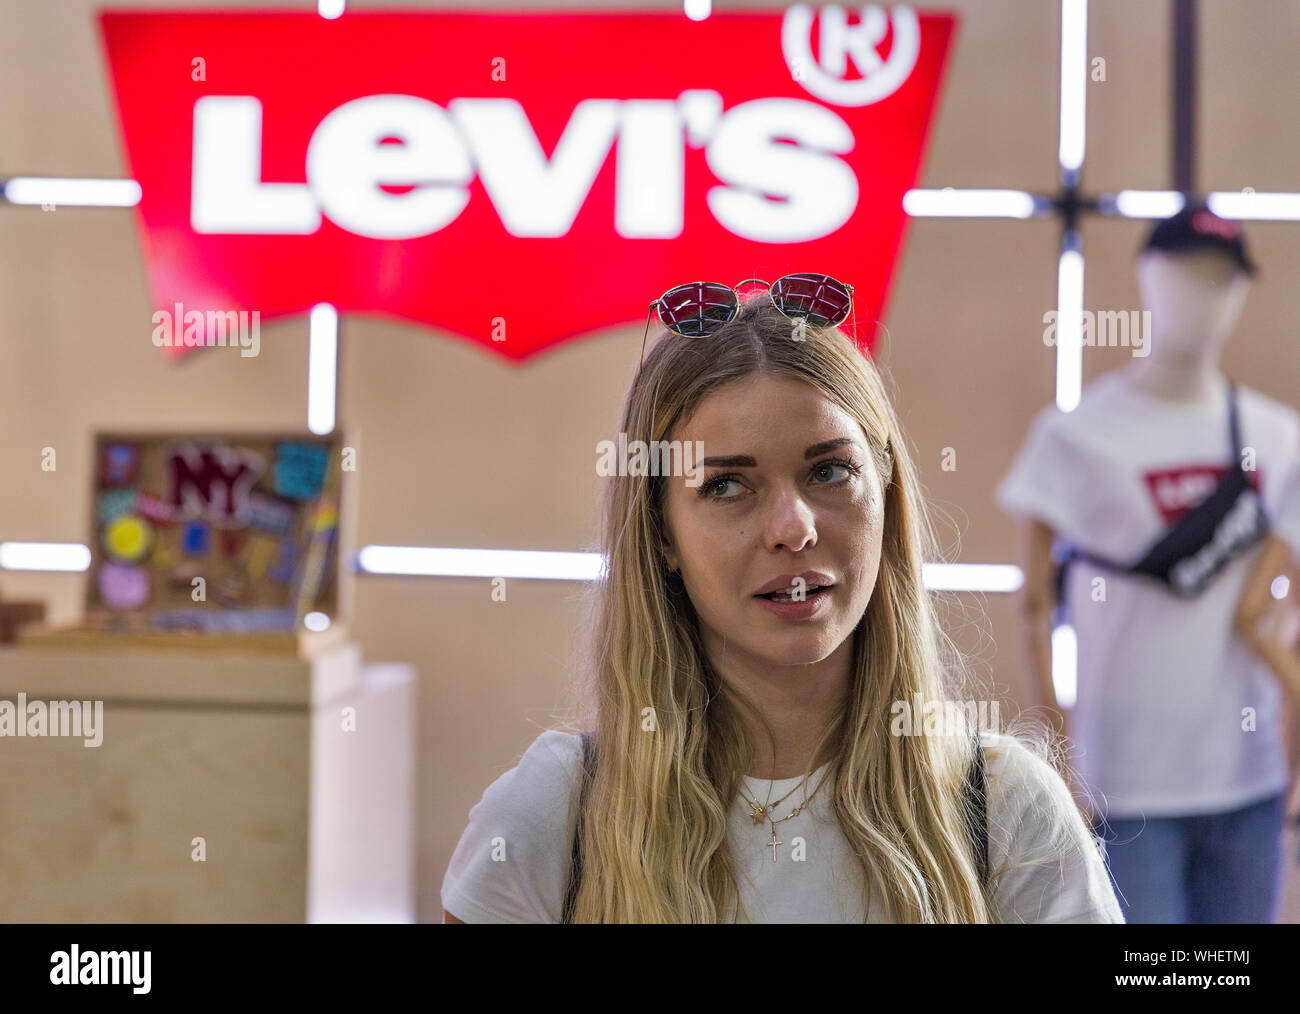 KYIV, UKRAINE - MAY 18, 2019: Young beautiful woman works at Levi's or Levi  Strauss an American clothing company booth during Kyiv Beer Festival vol  Stock Photo - Alamy